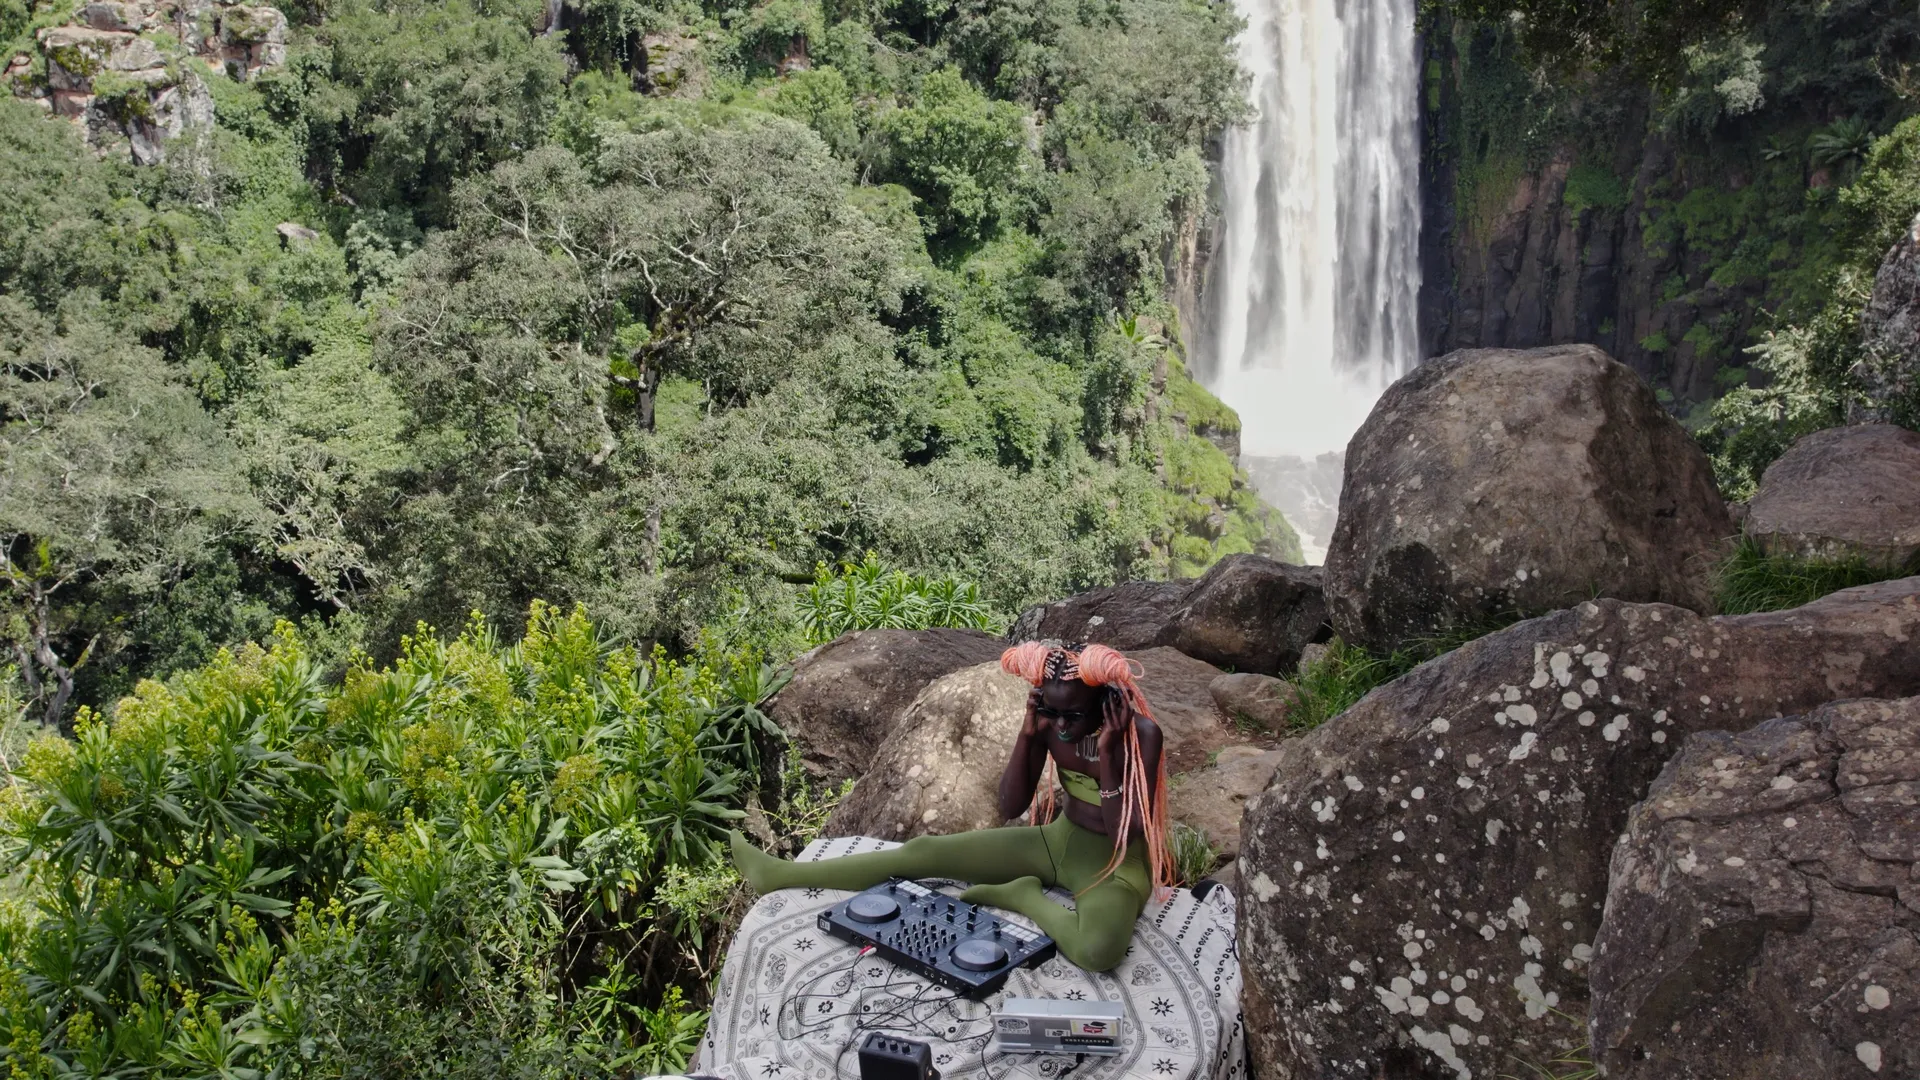 A person with dark skin and pink braided hair listening to a track on their headphones, sitting on a rock with mixing table & laptop in front of a lush background with waterfall